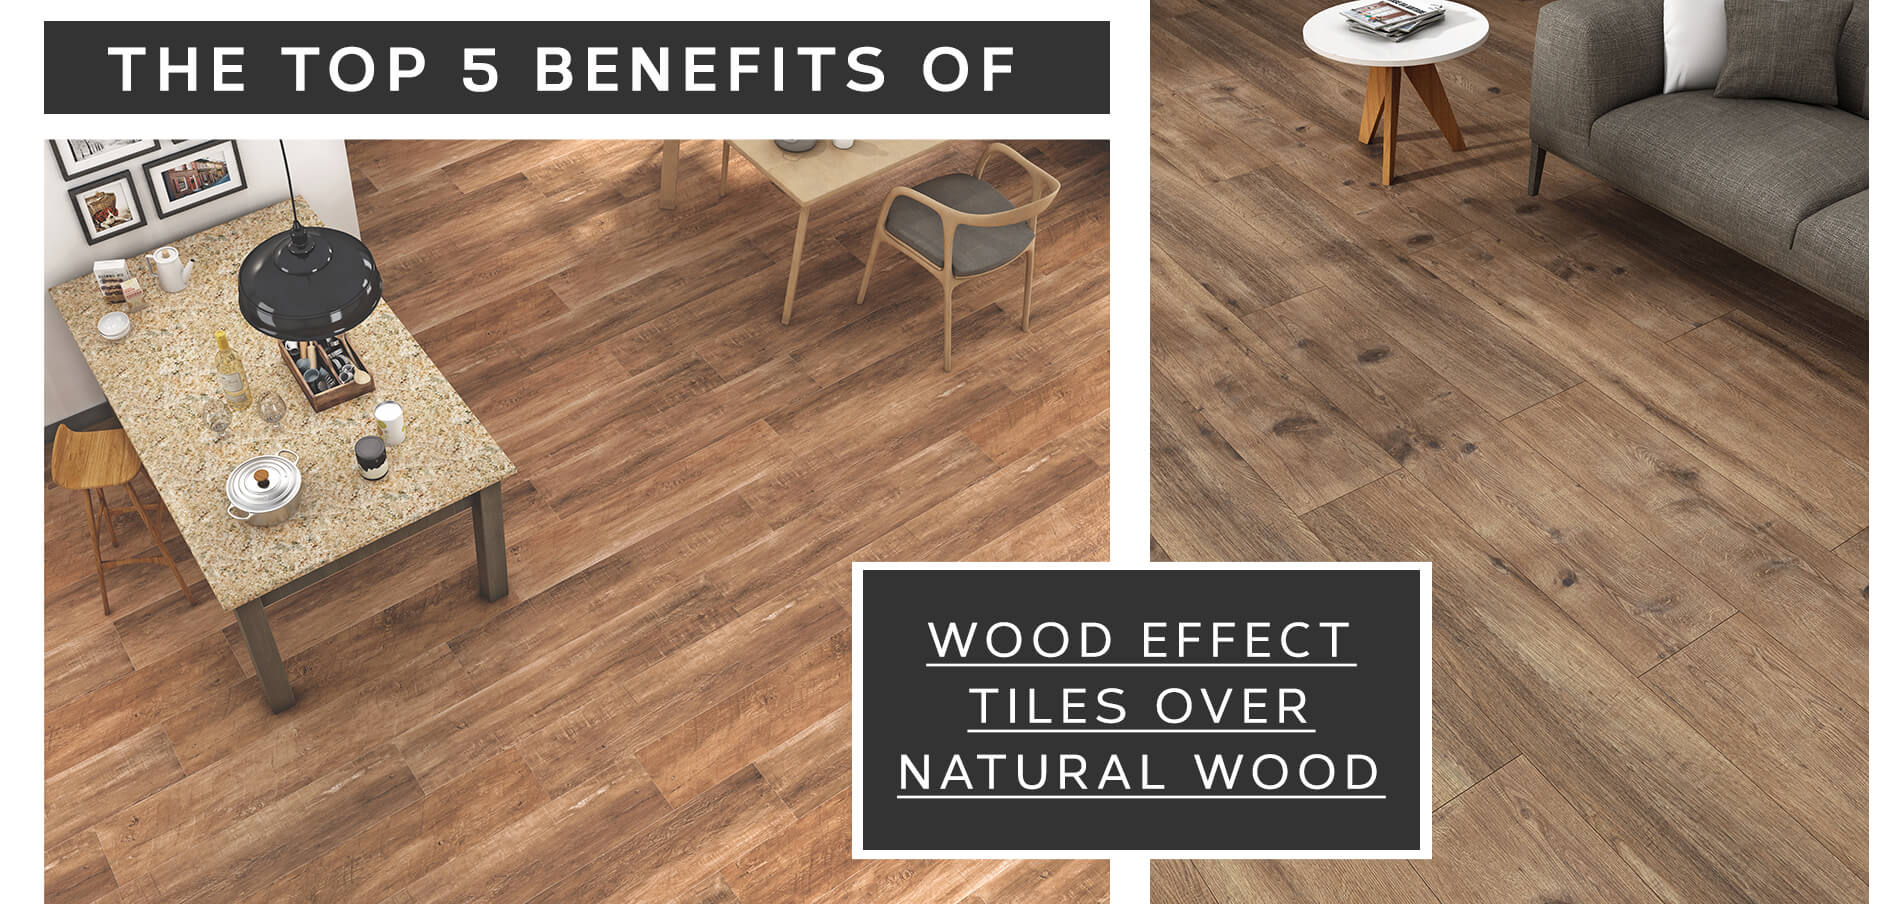 The Top 5 Benefits of Wood Effect Tiles Over Natural Wood